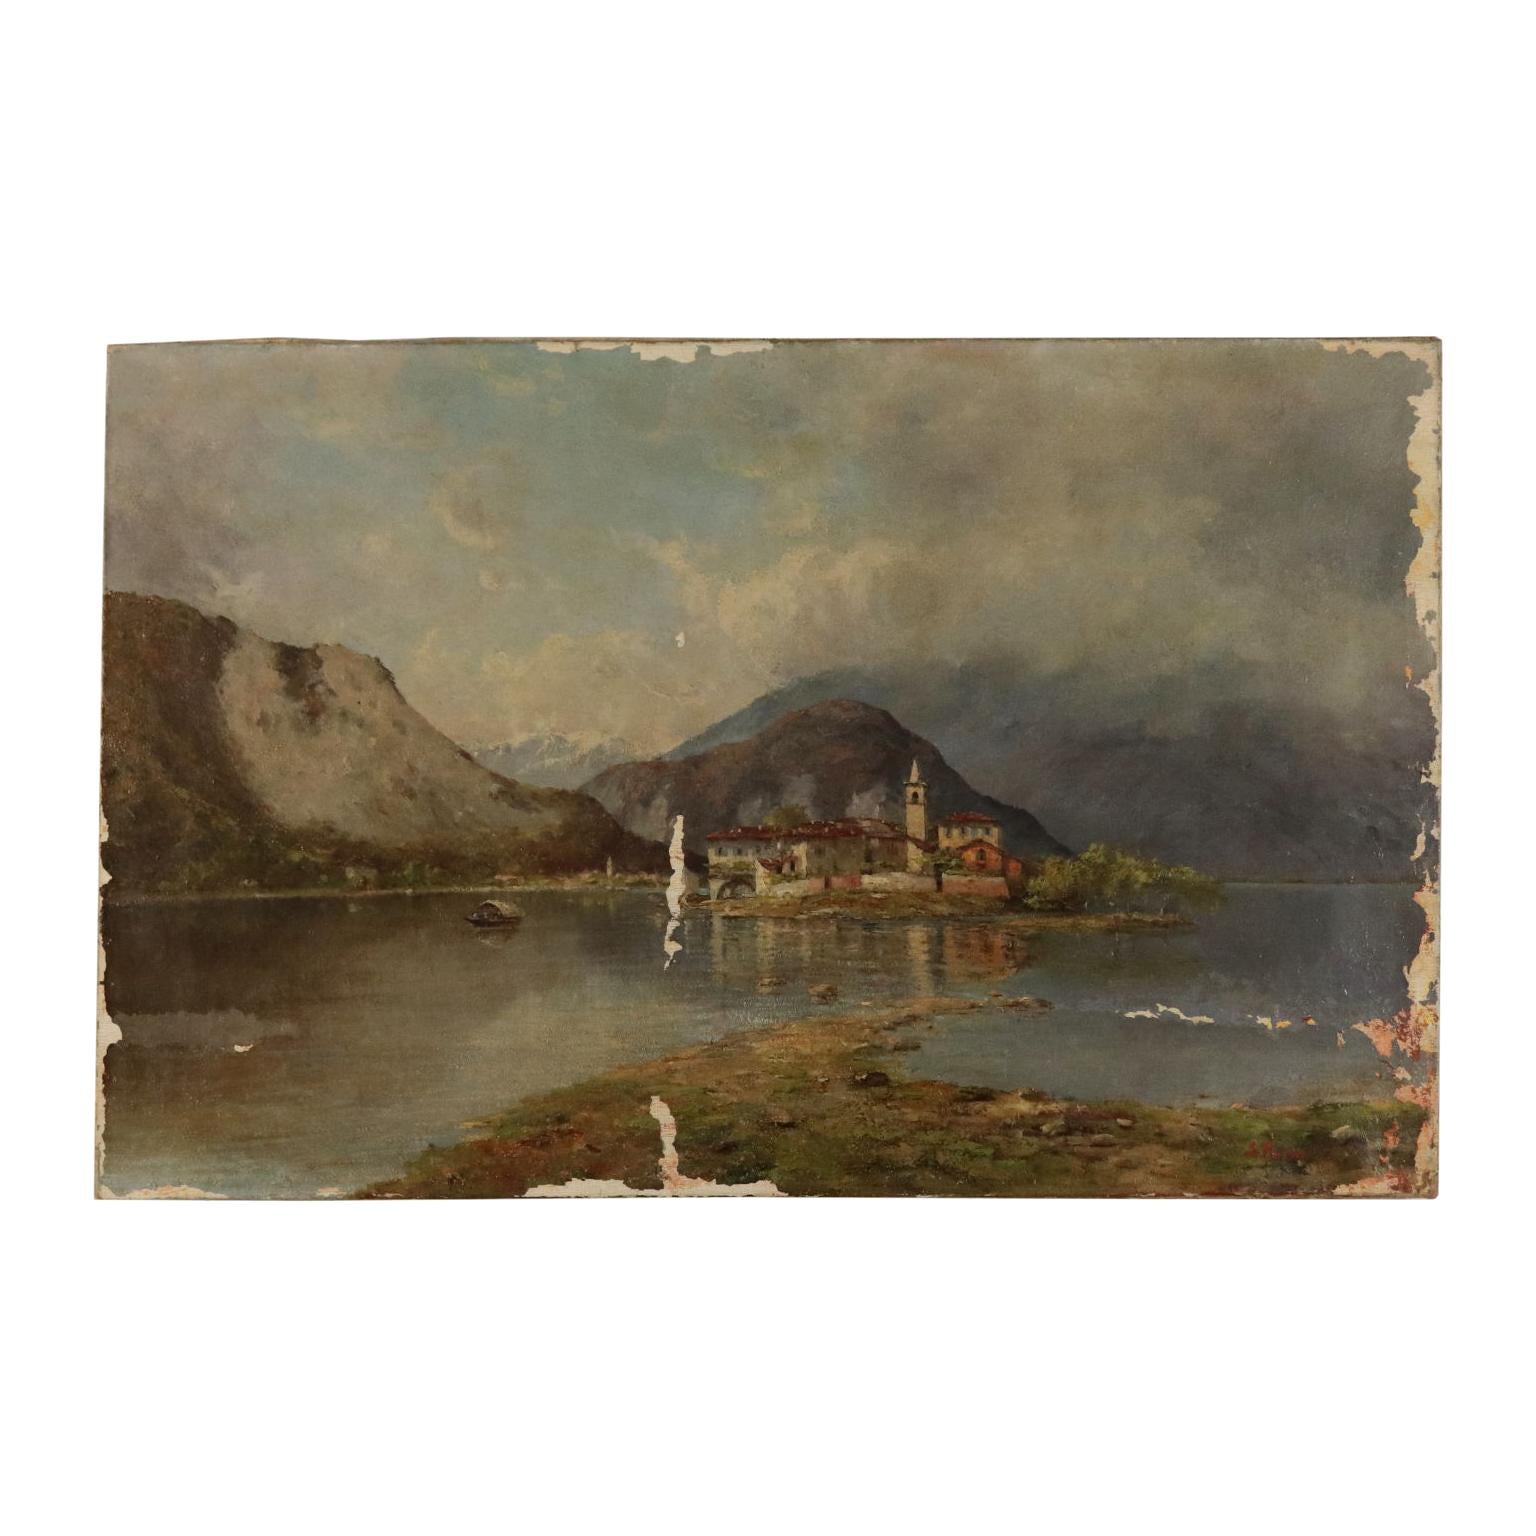 Unknown Landscape Painting - Landscape attributable to Silvio Poma, Oil on Canvas, 19th Century